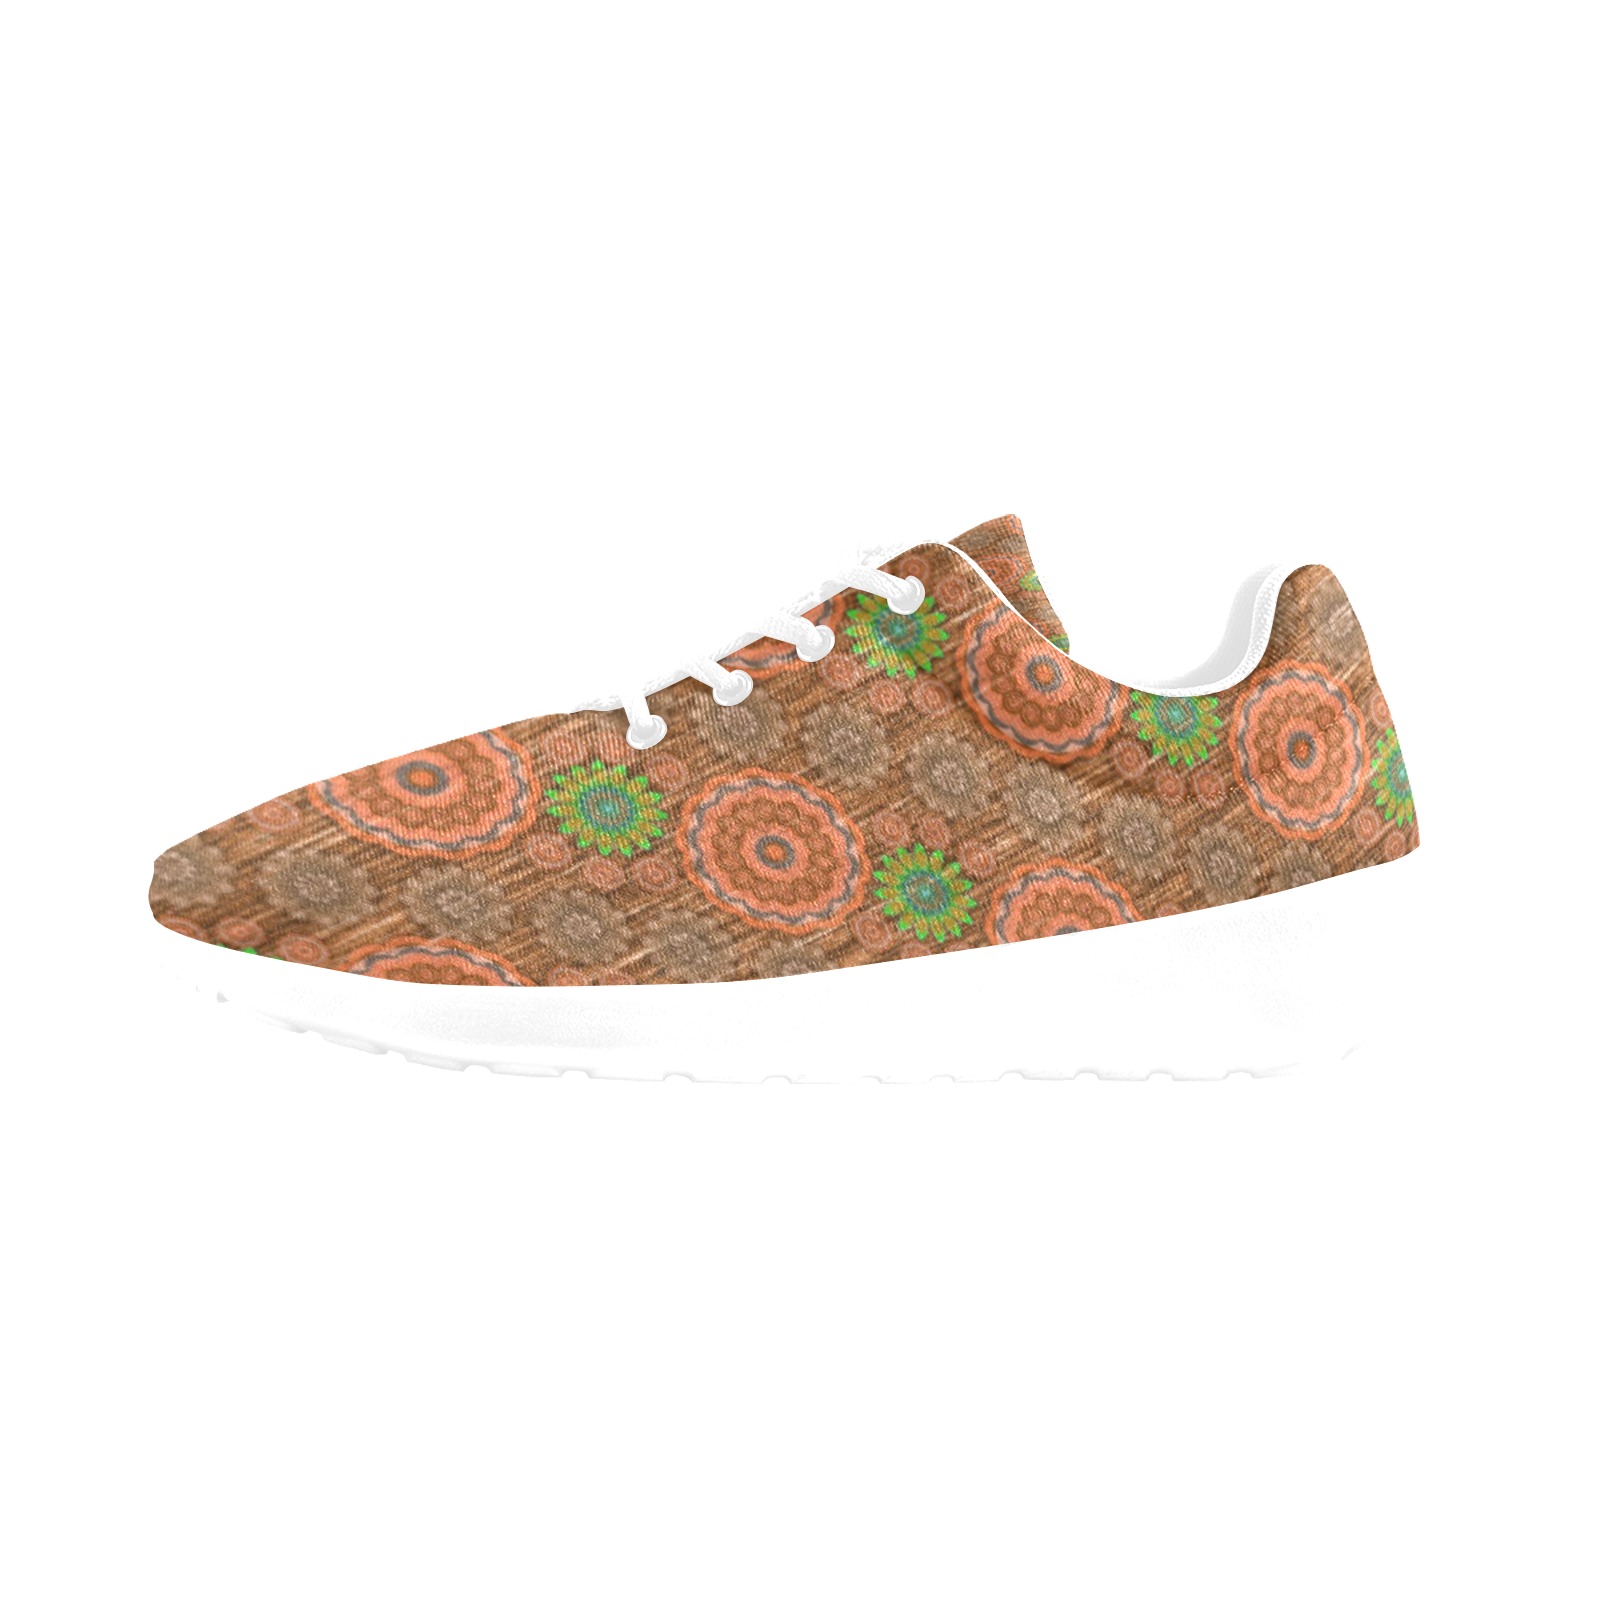 The Orange floral rainy scatter fibers textured Women's Athletic Shoes (Model 0200)